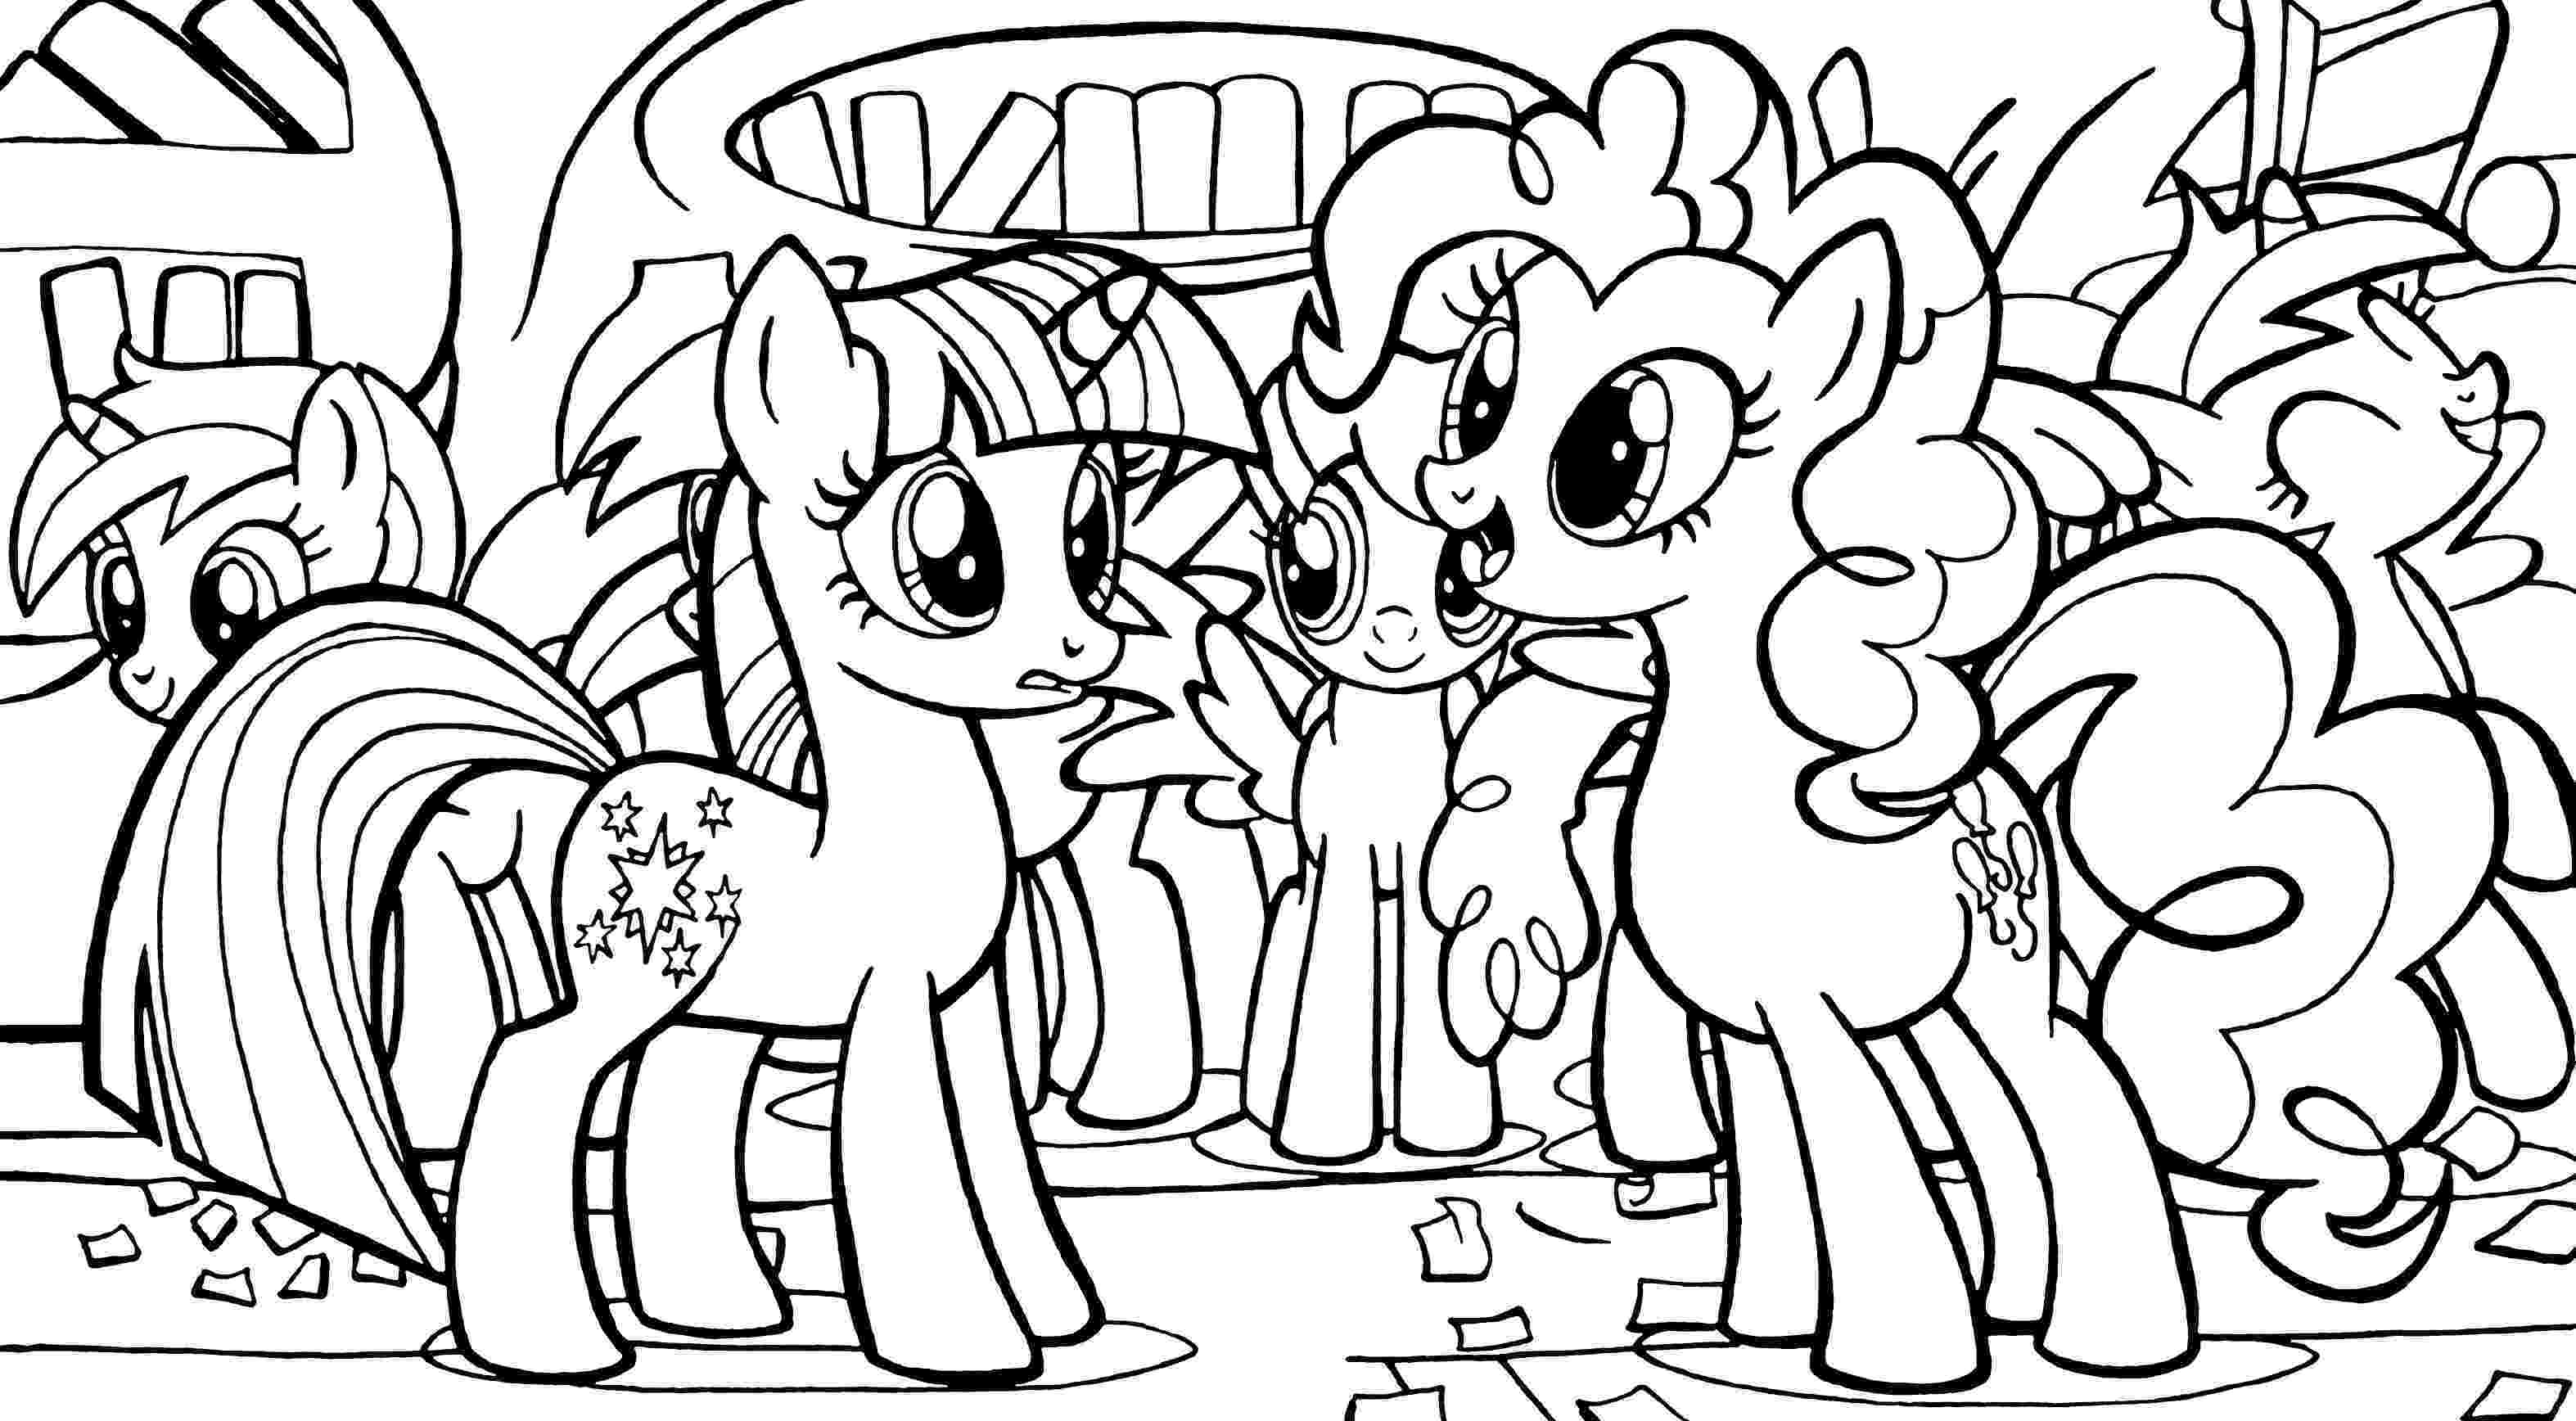 pony coloring pages for girls pinkie pie pony coloring pages for girls to print for free for pony coloring girls pages 